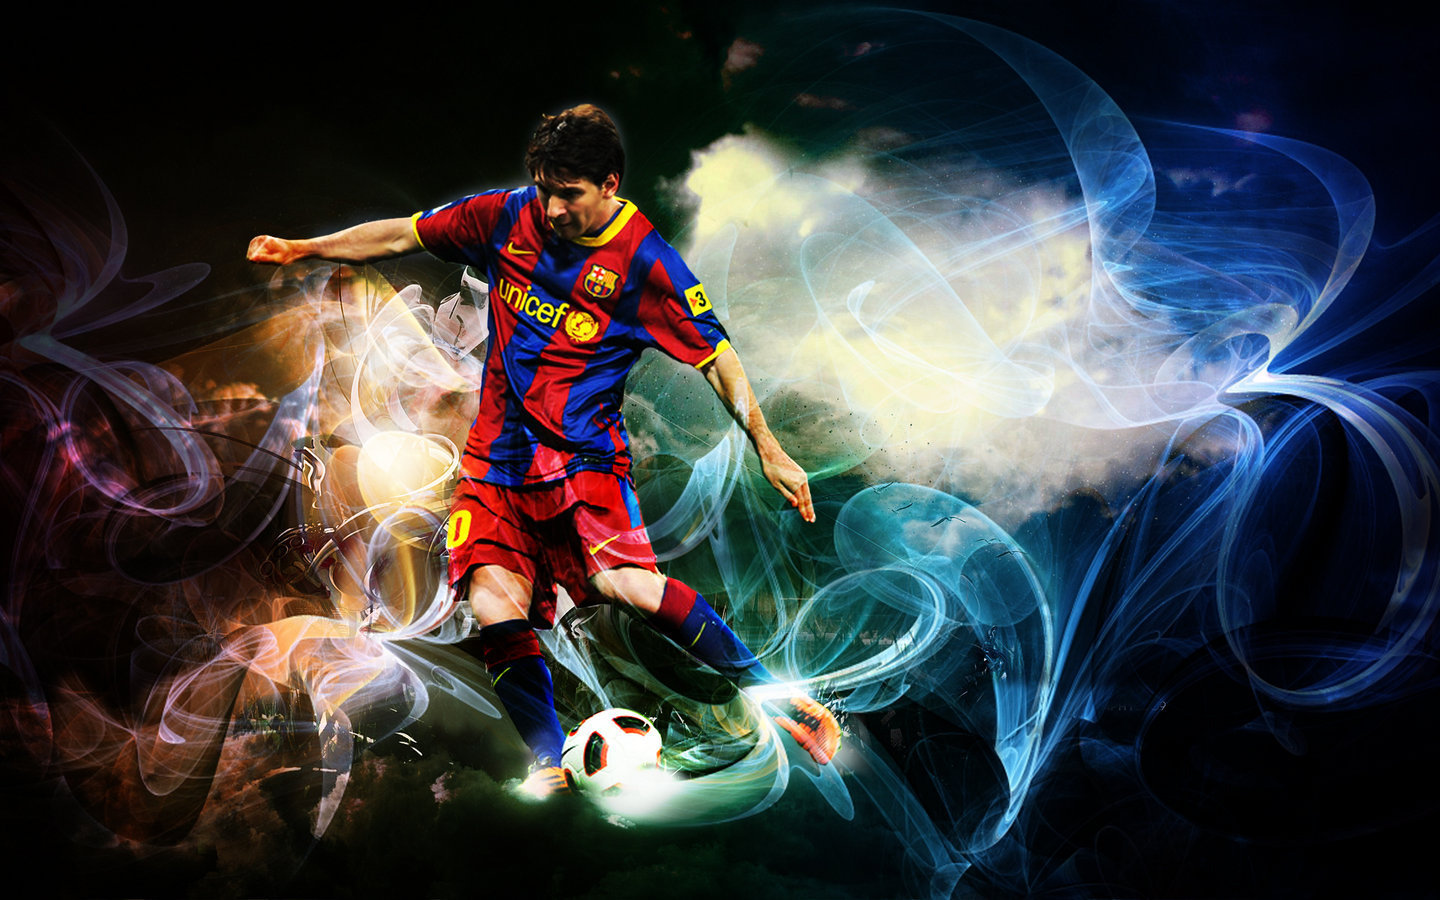 Image Cool Soccer Wallpaper Lionel Messi Pc Android iPhone